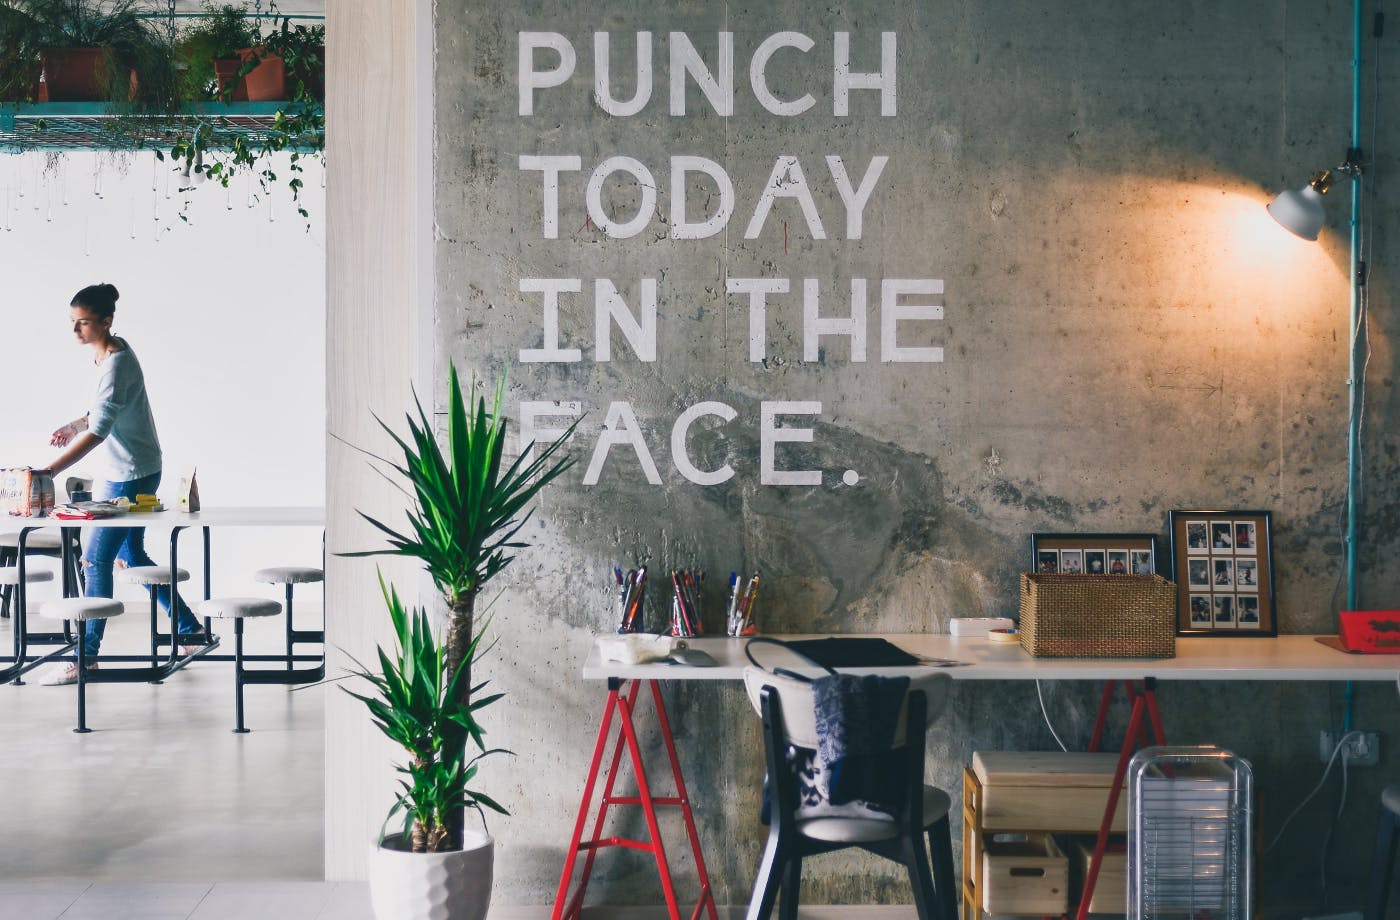 An office with Punch Today in the Face on the wall